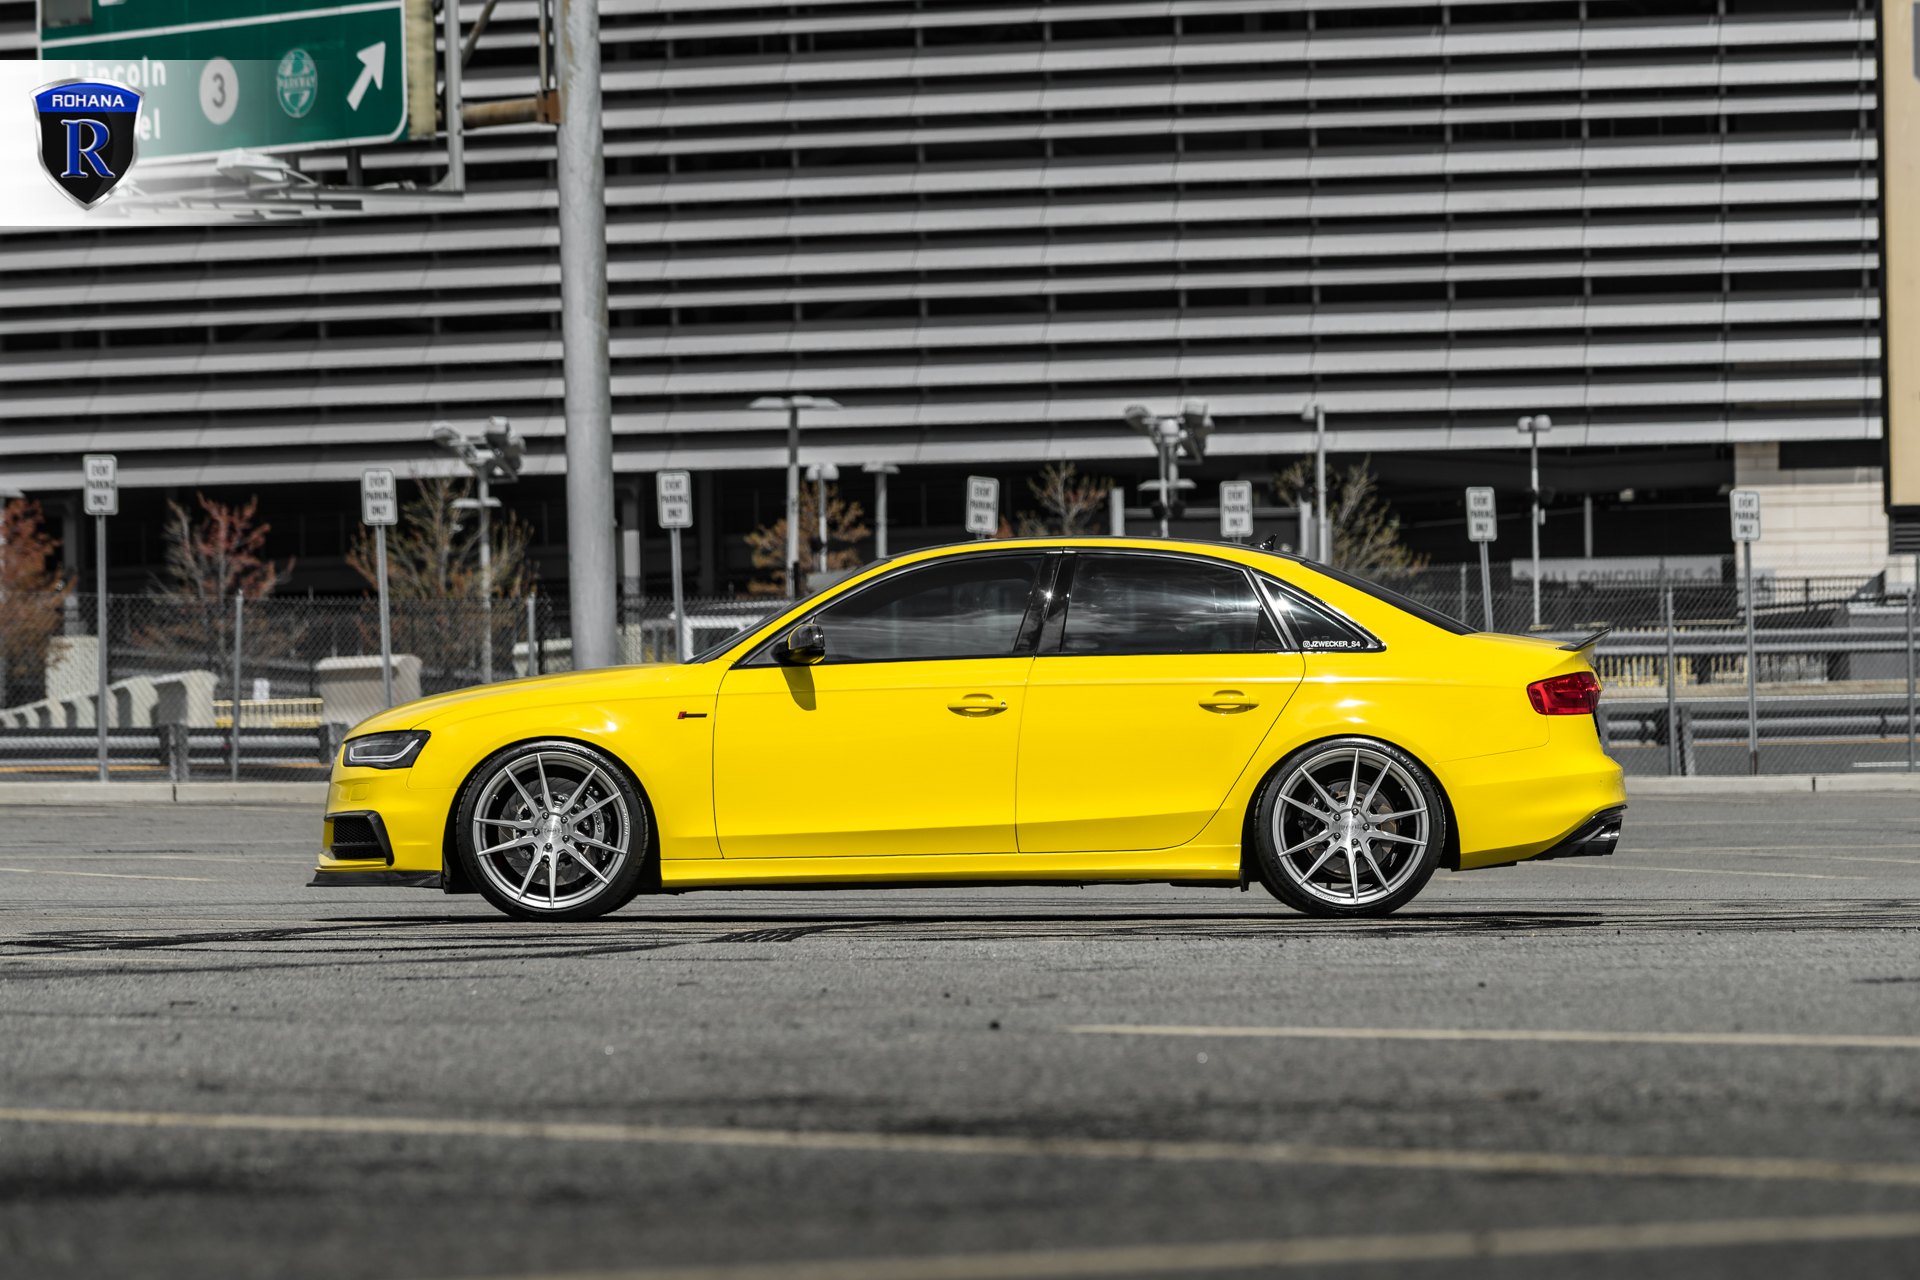 Aftermarket Side Skirts on Yellow Audi S4 - Photo by Rohana Wheels